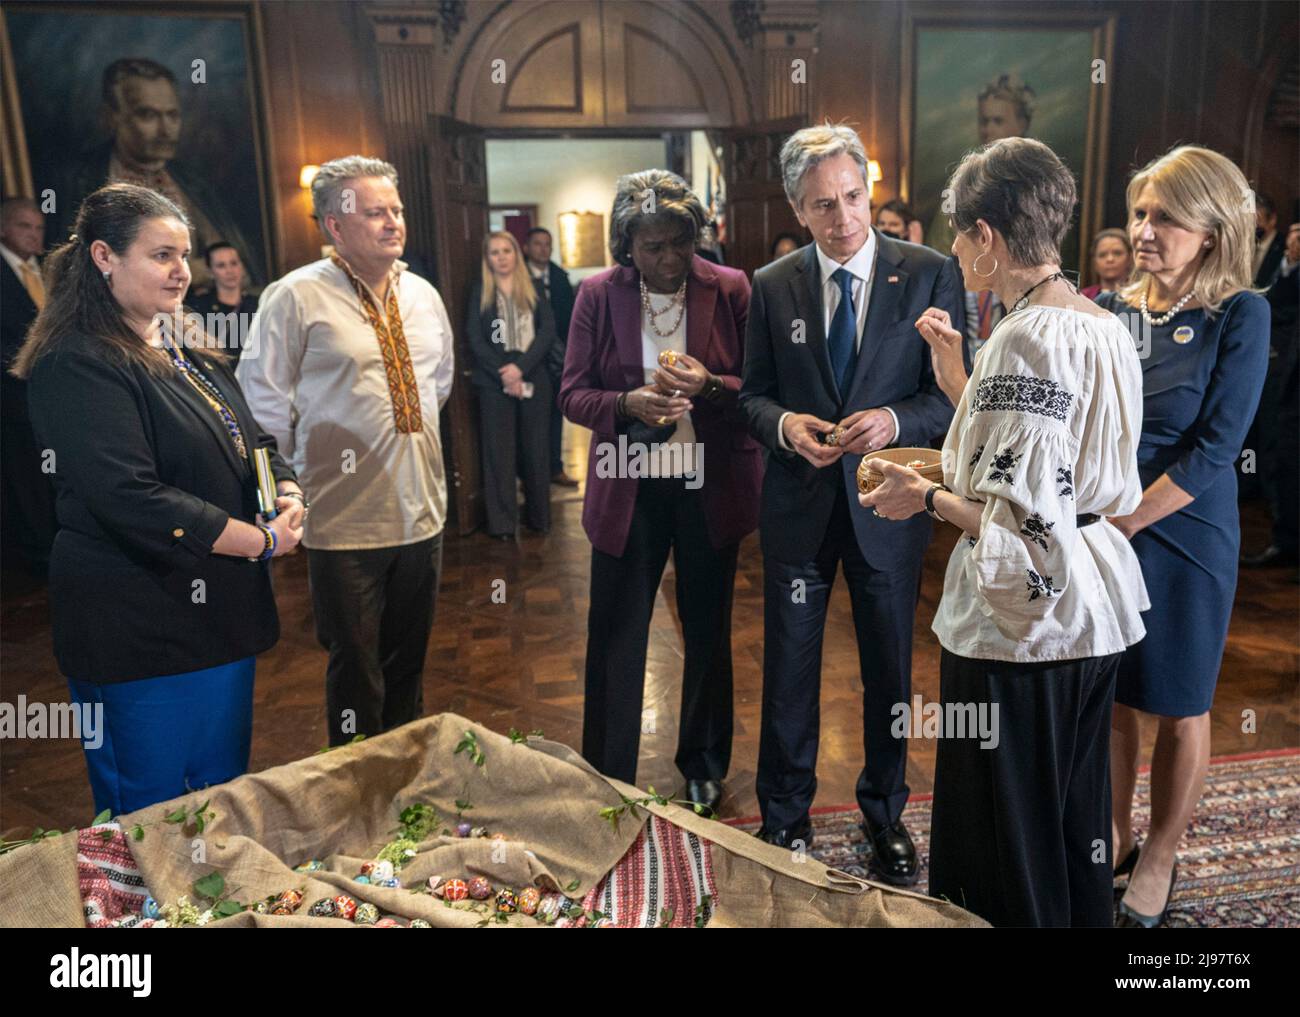 New York City, United States of America. 19 May, 2022. U.S. Secretary of State Antony Blinken, right, listens to Ukrainian artist Sofika Zielyk, left, describe her process making ornate Easter eggs called pysanka during a visit to the Ukrainian Institute of America, May 19, 2022 in New York City, New York.  Credit: Freddie Everett/State Department/Alamy Live News Stock Photo